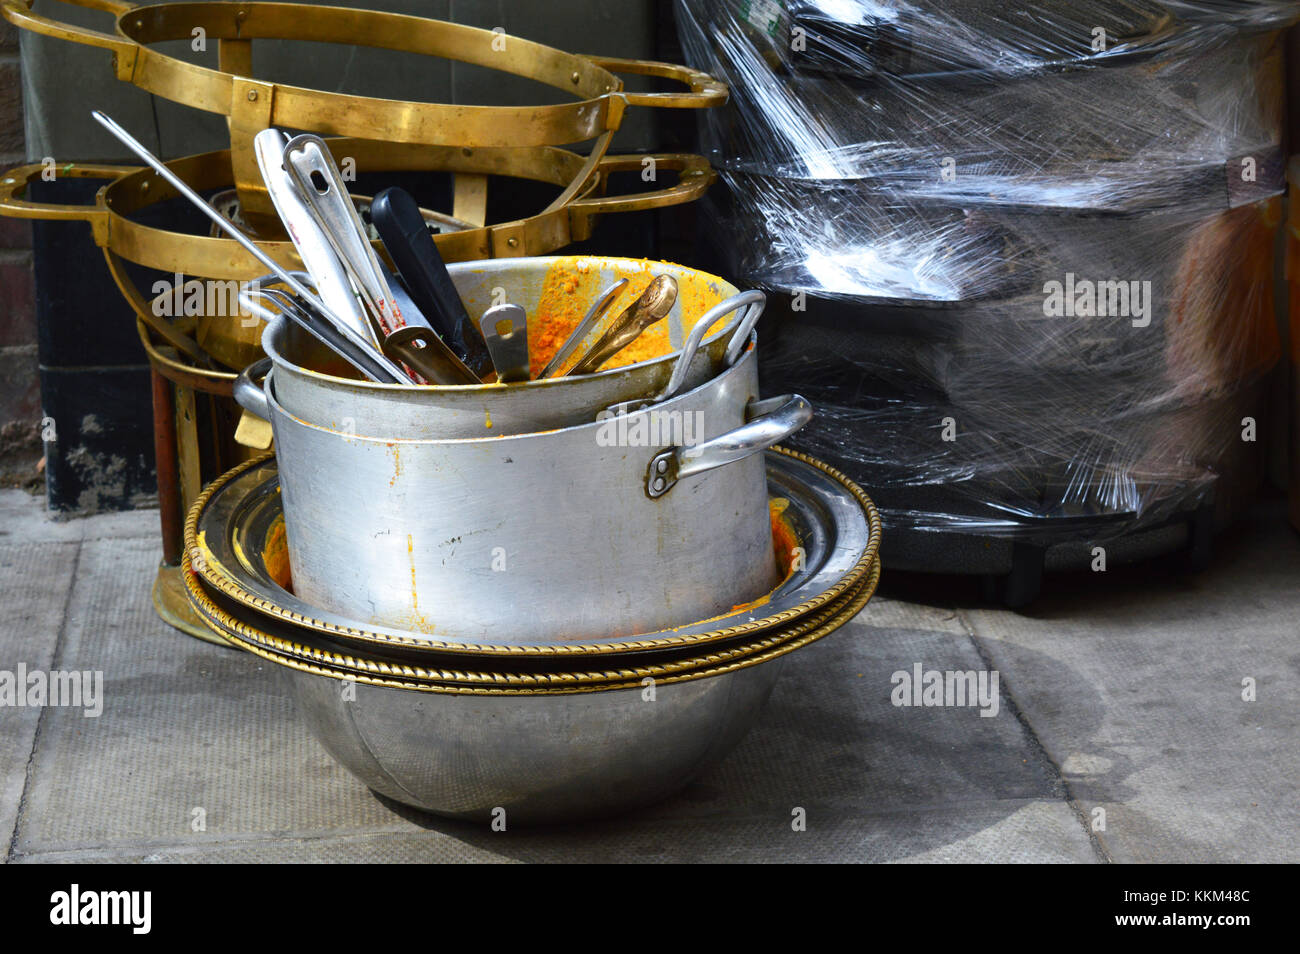 A stack of dirty cooking pots sitting on the street Stock Photo